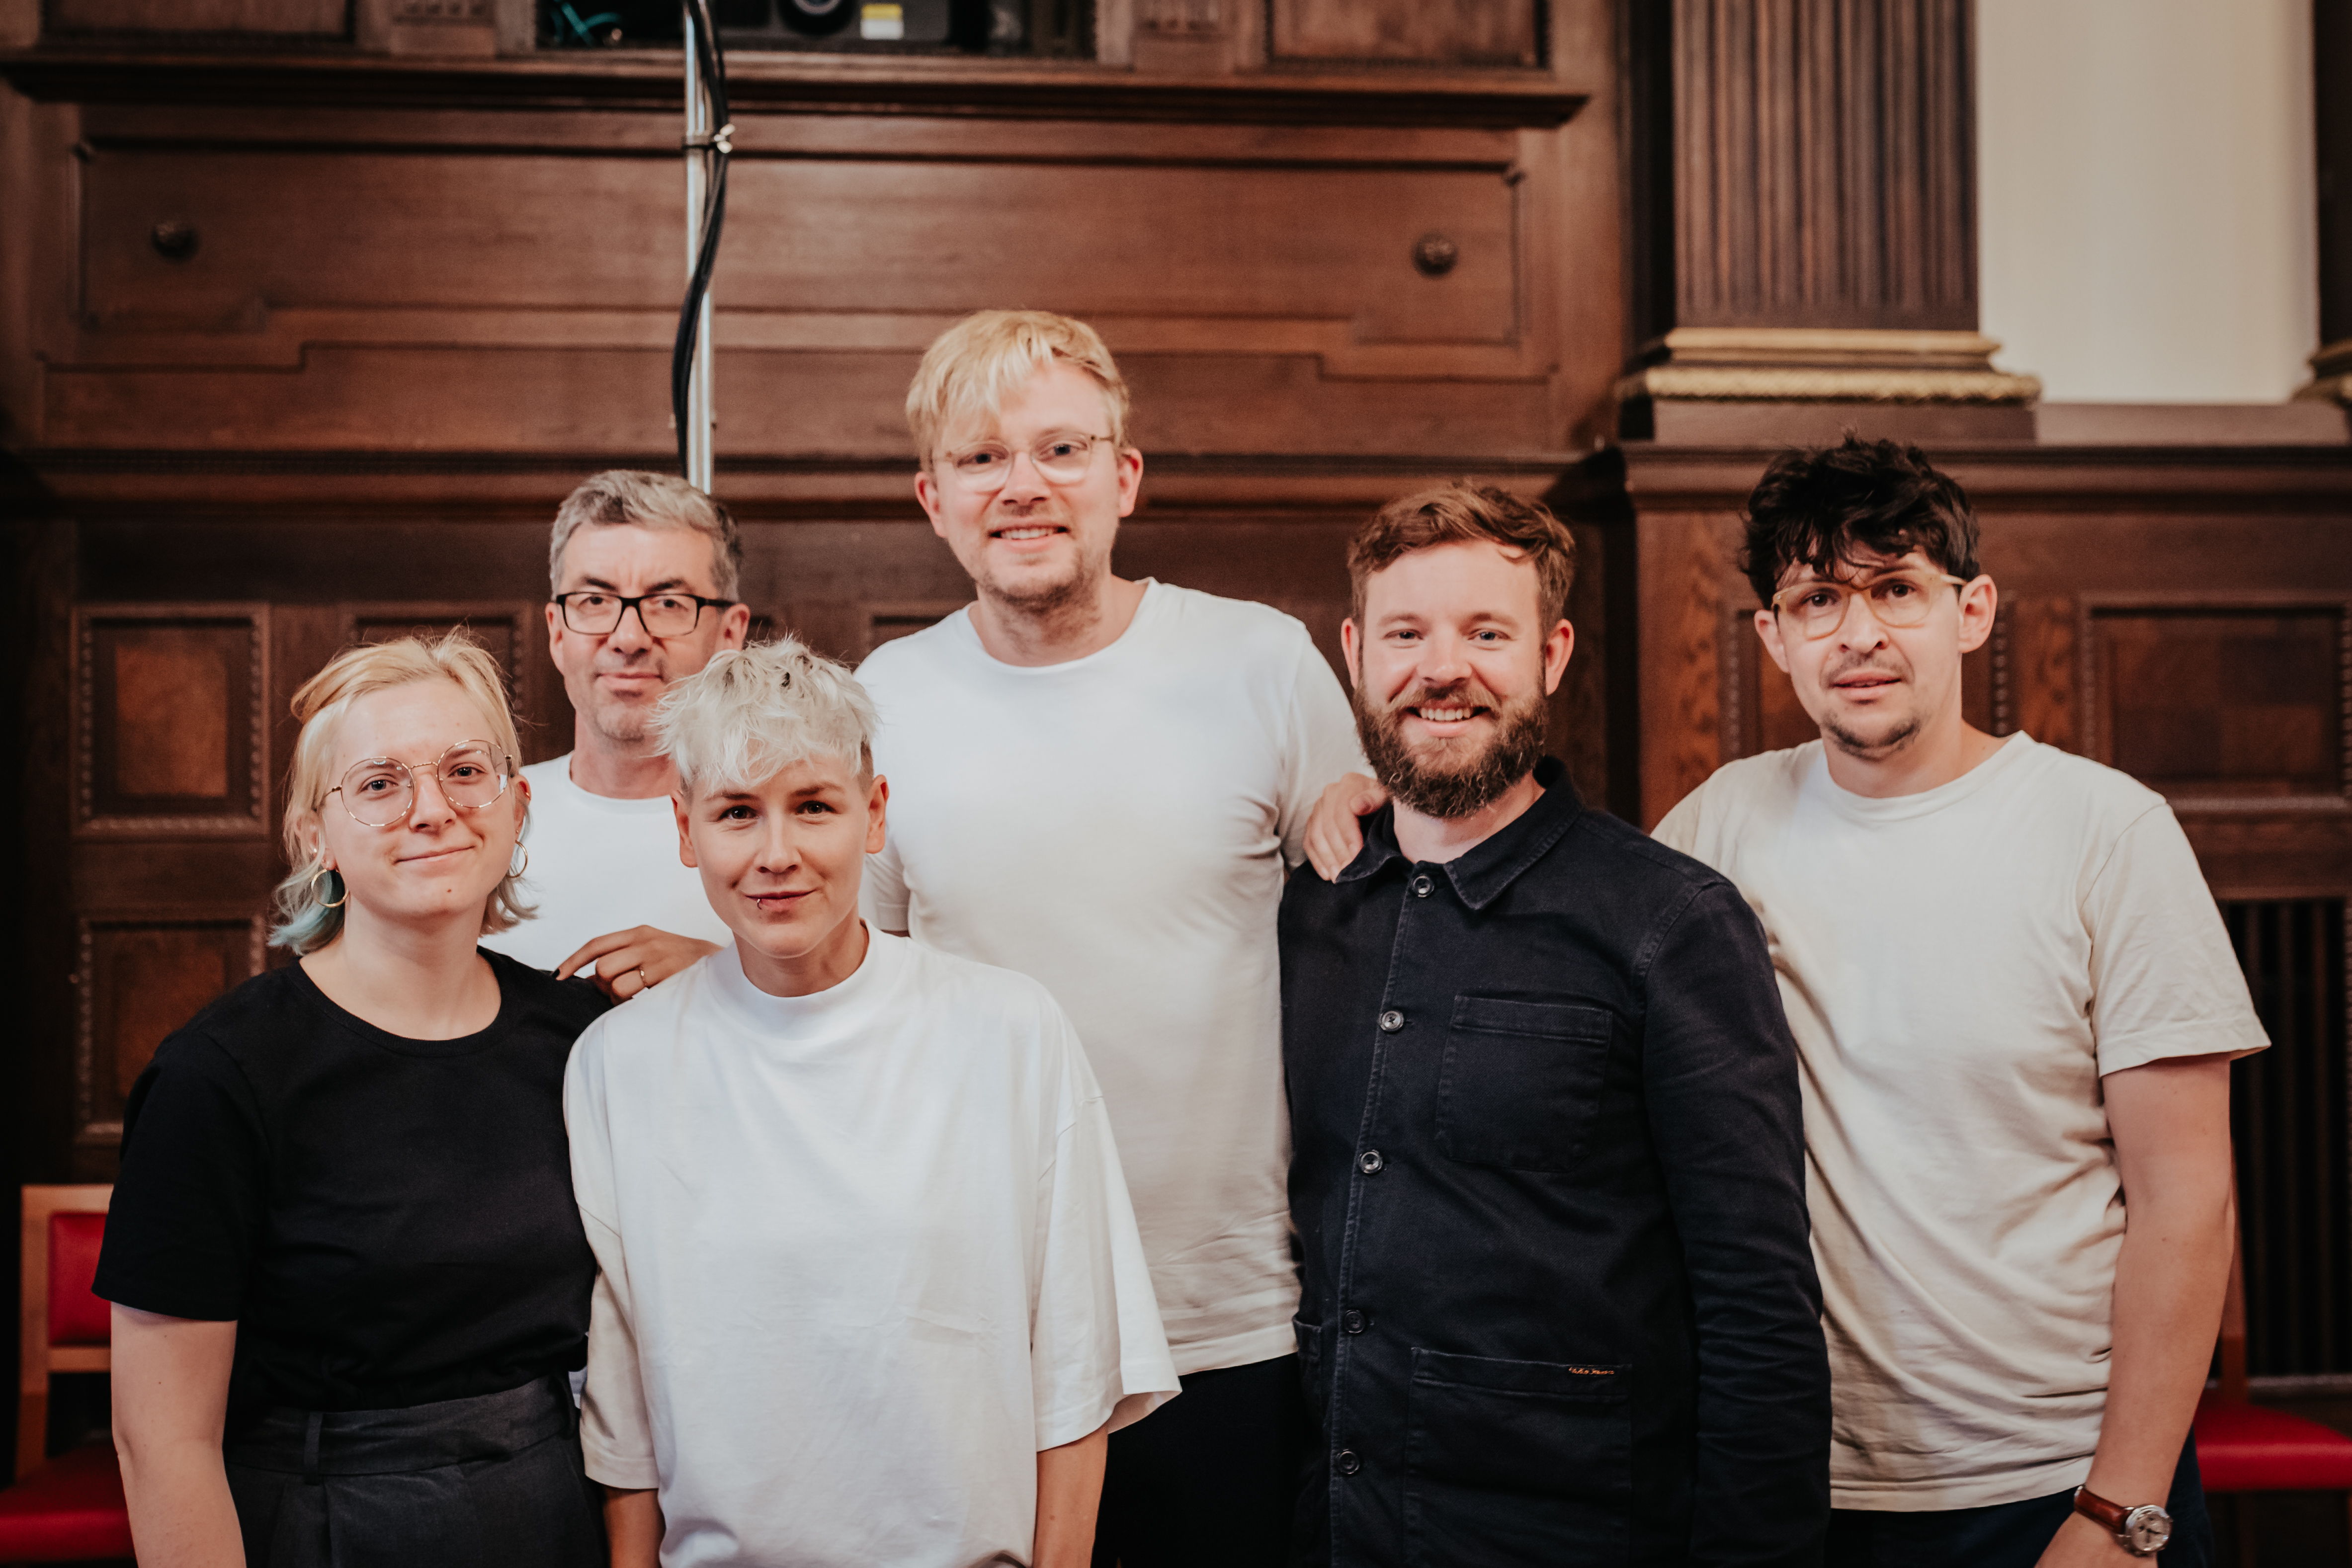 The recording team (from l. to r.): Hannah Schmeise, (3D audio assistance and editing), Florian B. Schmidt (tonmeister), Ann-Christine Bromm (3D audio assistance), Johannes Kares (3D audio assistance), Henrik Oppermann (Artistic Partner and 3D sound engineer), Jonas Ritter (3D audio assistance) ​ ​ Image: bildgeber.de, courtesy of the Mahler Chamber Orchestra